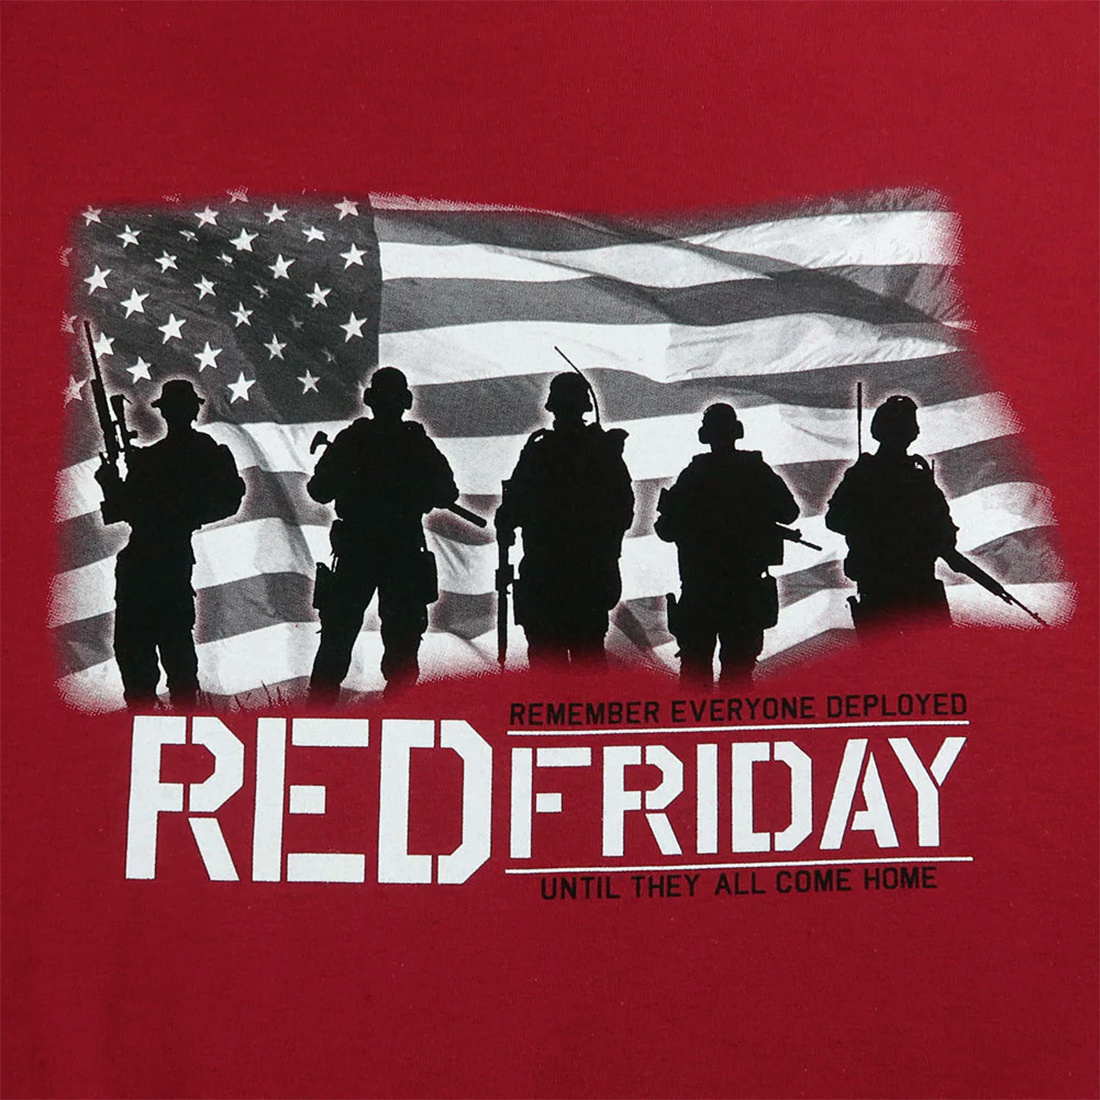 #RememberEveryoneDeployed 
#REDFriday 
#SupportOurTroops 

Lord, be their constant companion. Protect them no matter where they go, and bring them safely and quickly home to those who love them.